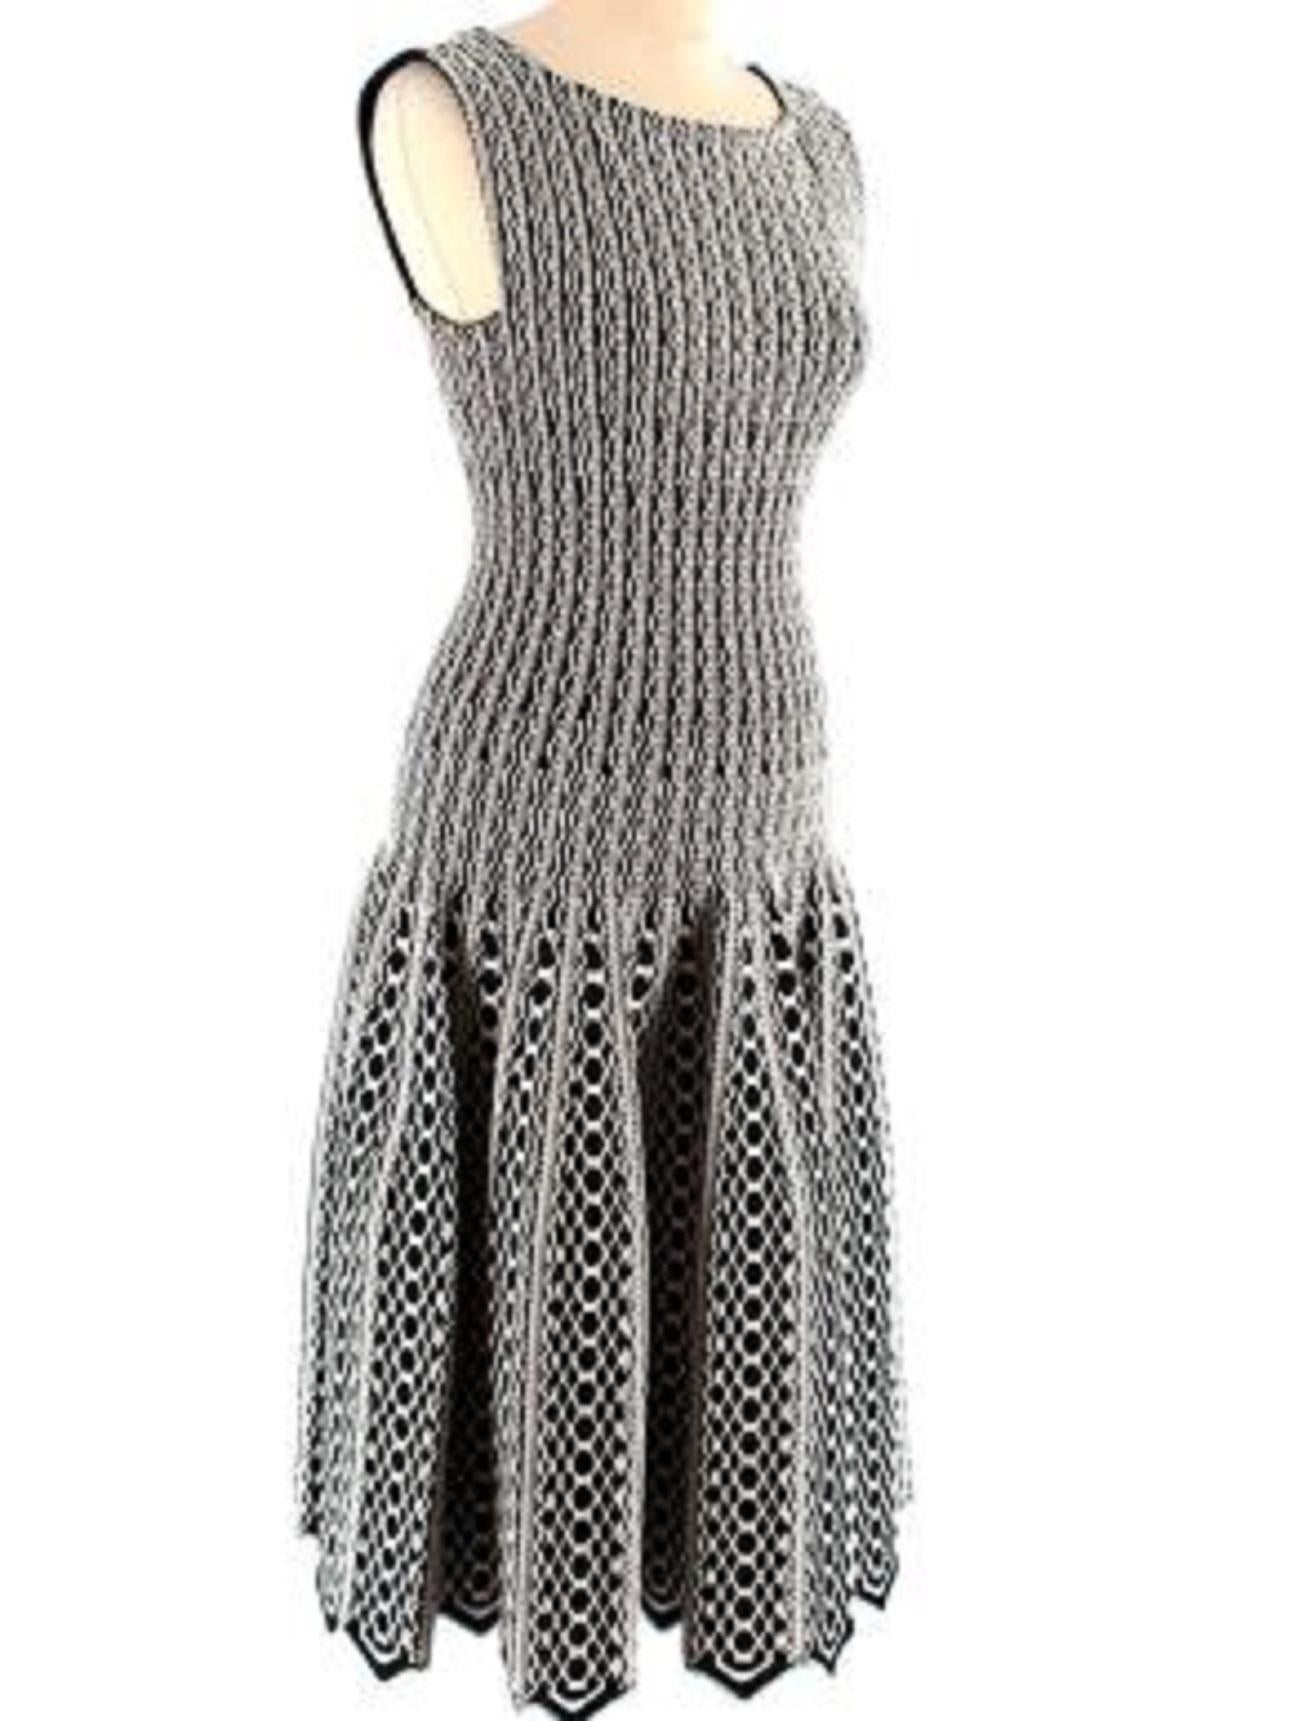 Alaia Black and White patterned skater dress 

-Square neckline 
-Zip fastening along the back 
-Sleeveless 
-Mid-weight with slight stretch 
-Intarsia knit design 
-Pleated from waist 
-Scalloped hem

Material: 

70% Viscose 
20% Polyamide 
6%